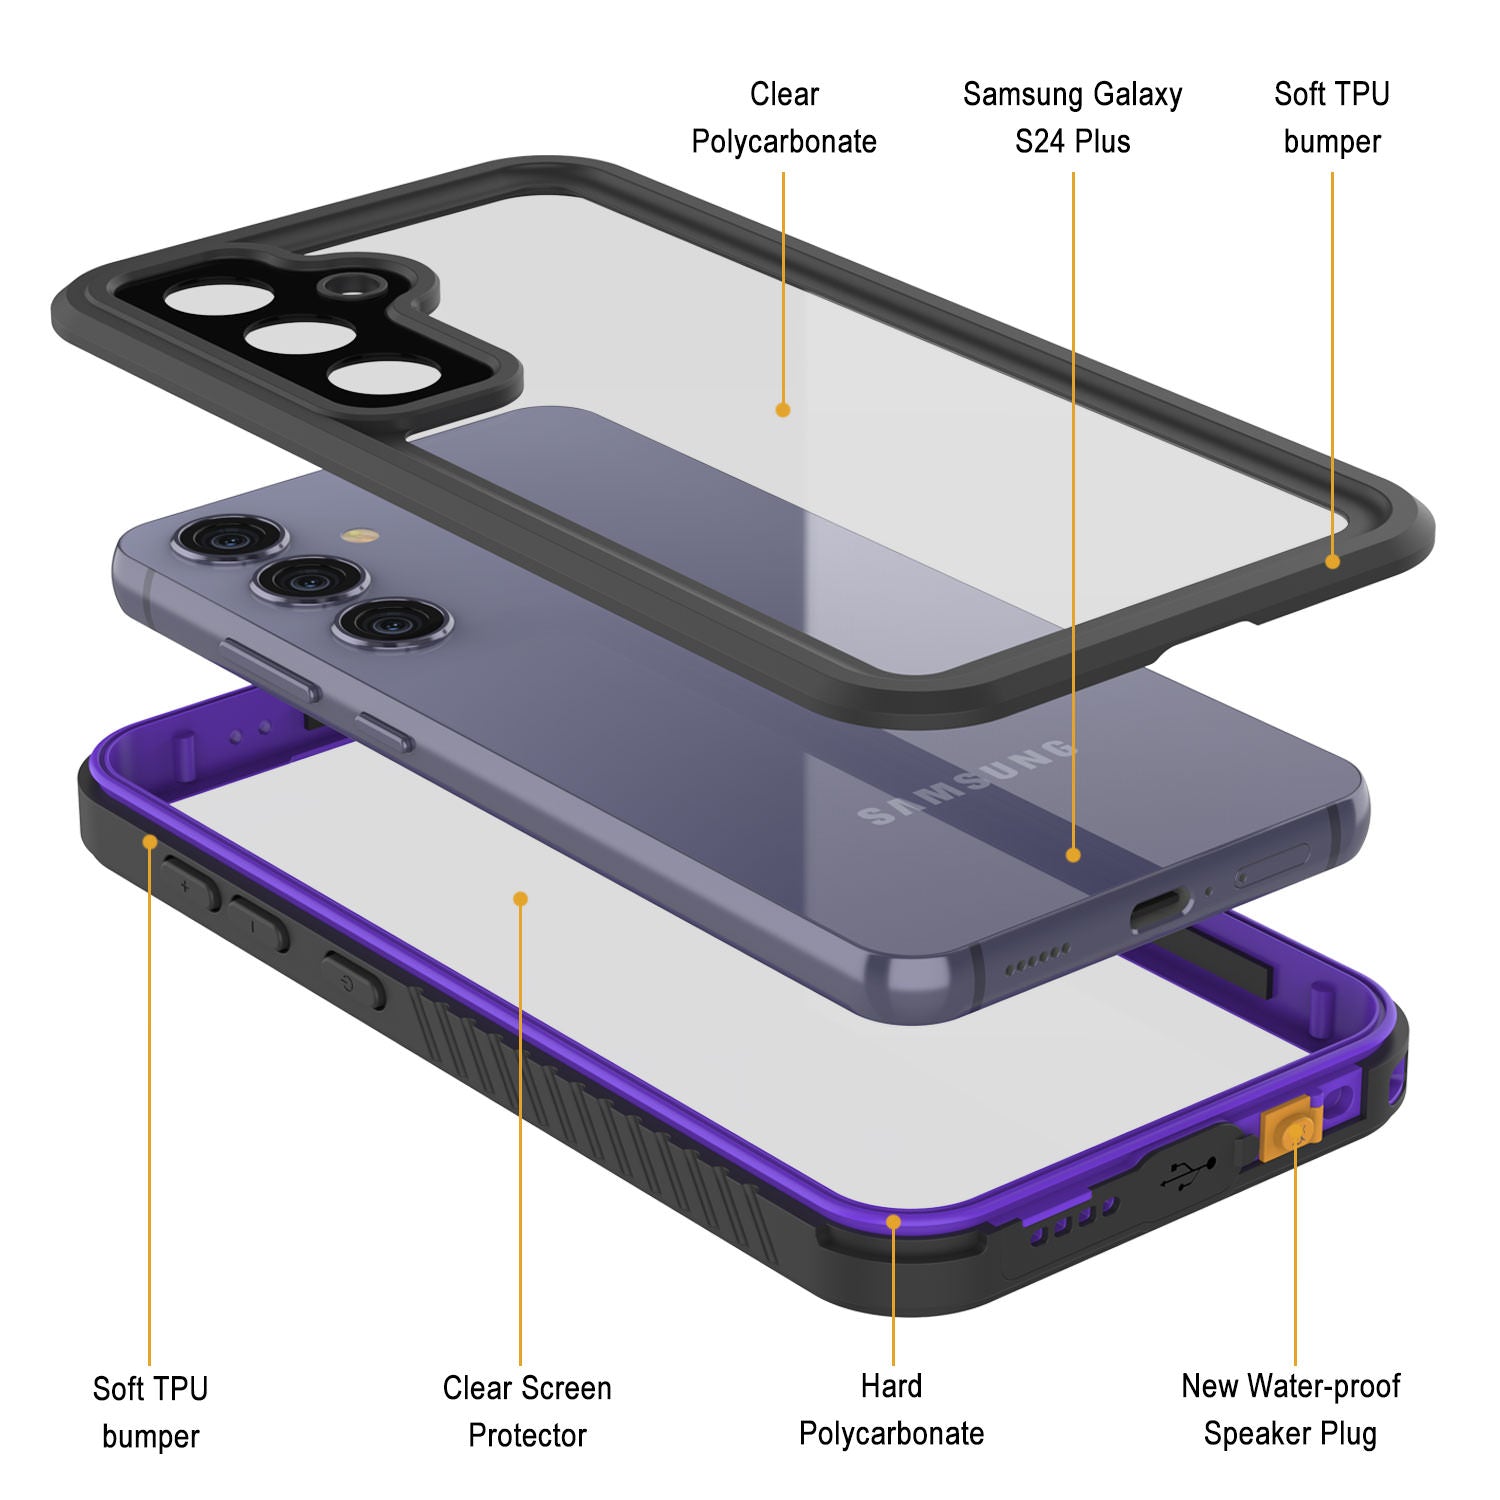 Galaxy S24+ Plus Water/ Shockproof [Extreme Series] Slim Screen Protector Case [Purple]